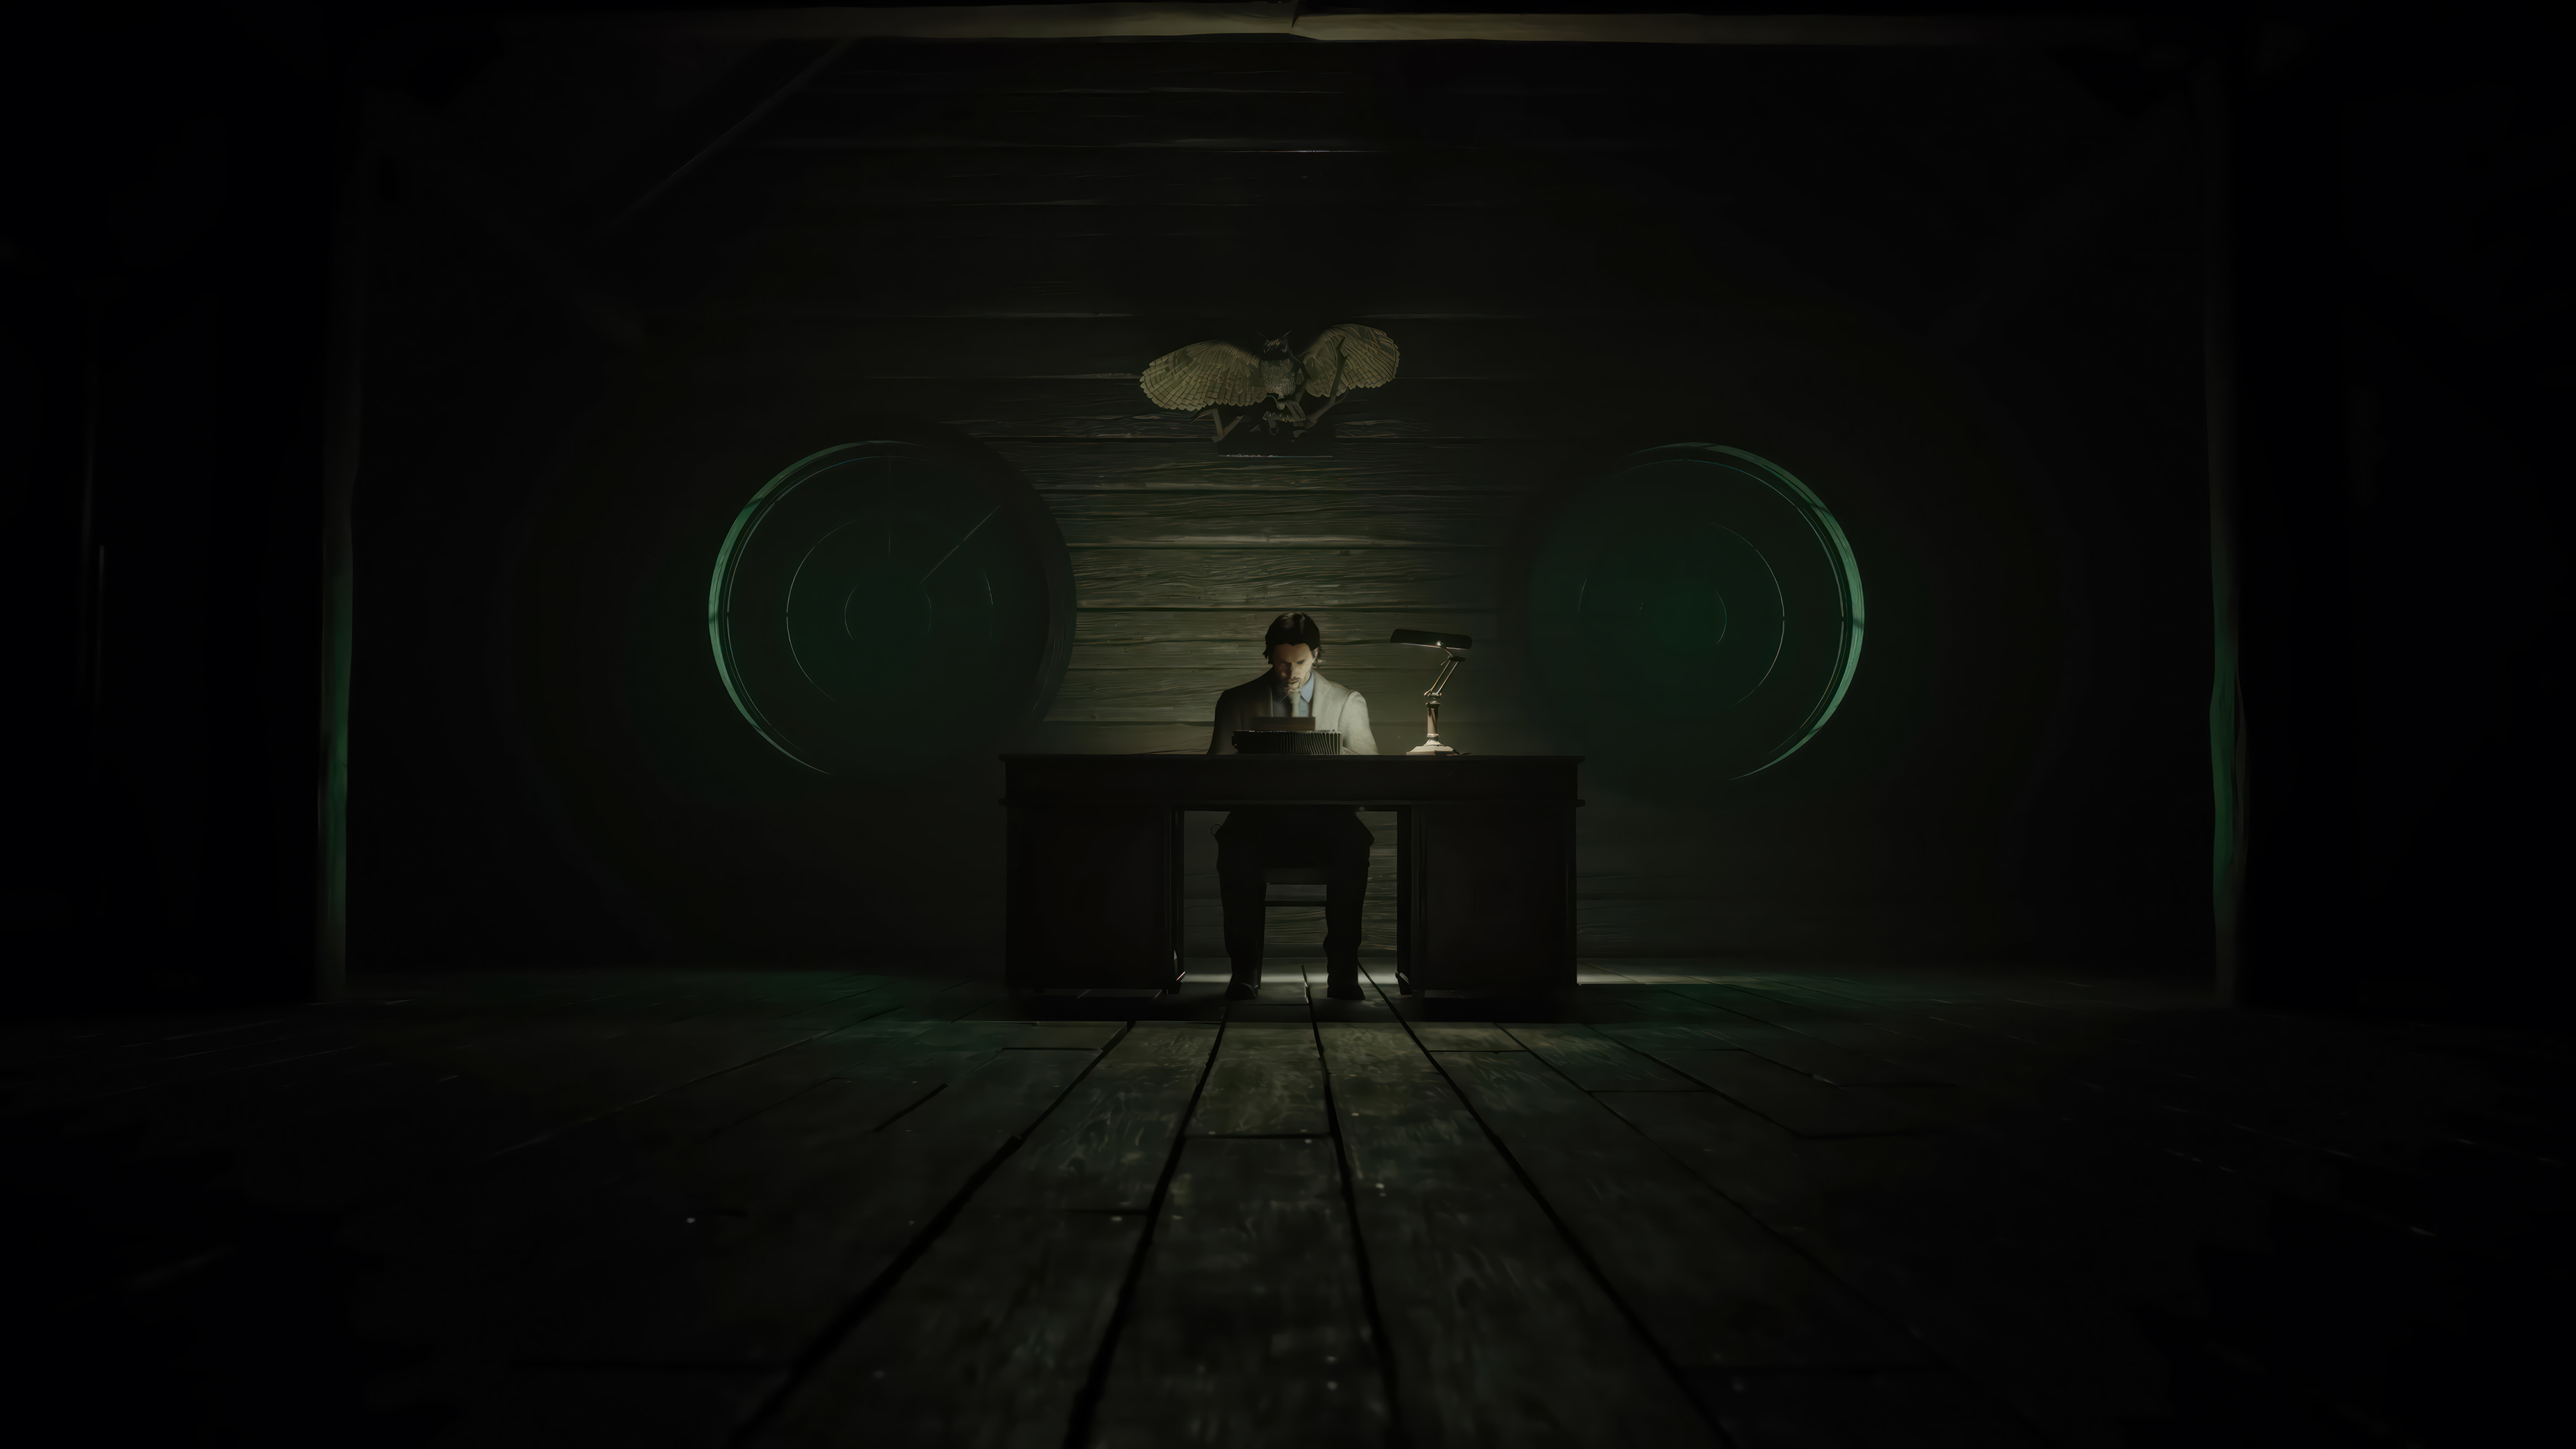 Dark atmospheric Alan Wake 2 HD wallpaper featuring mysterious figure at desk with green lighting accents